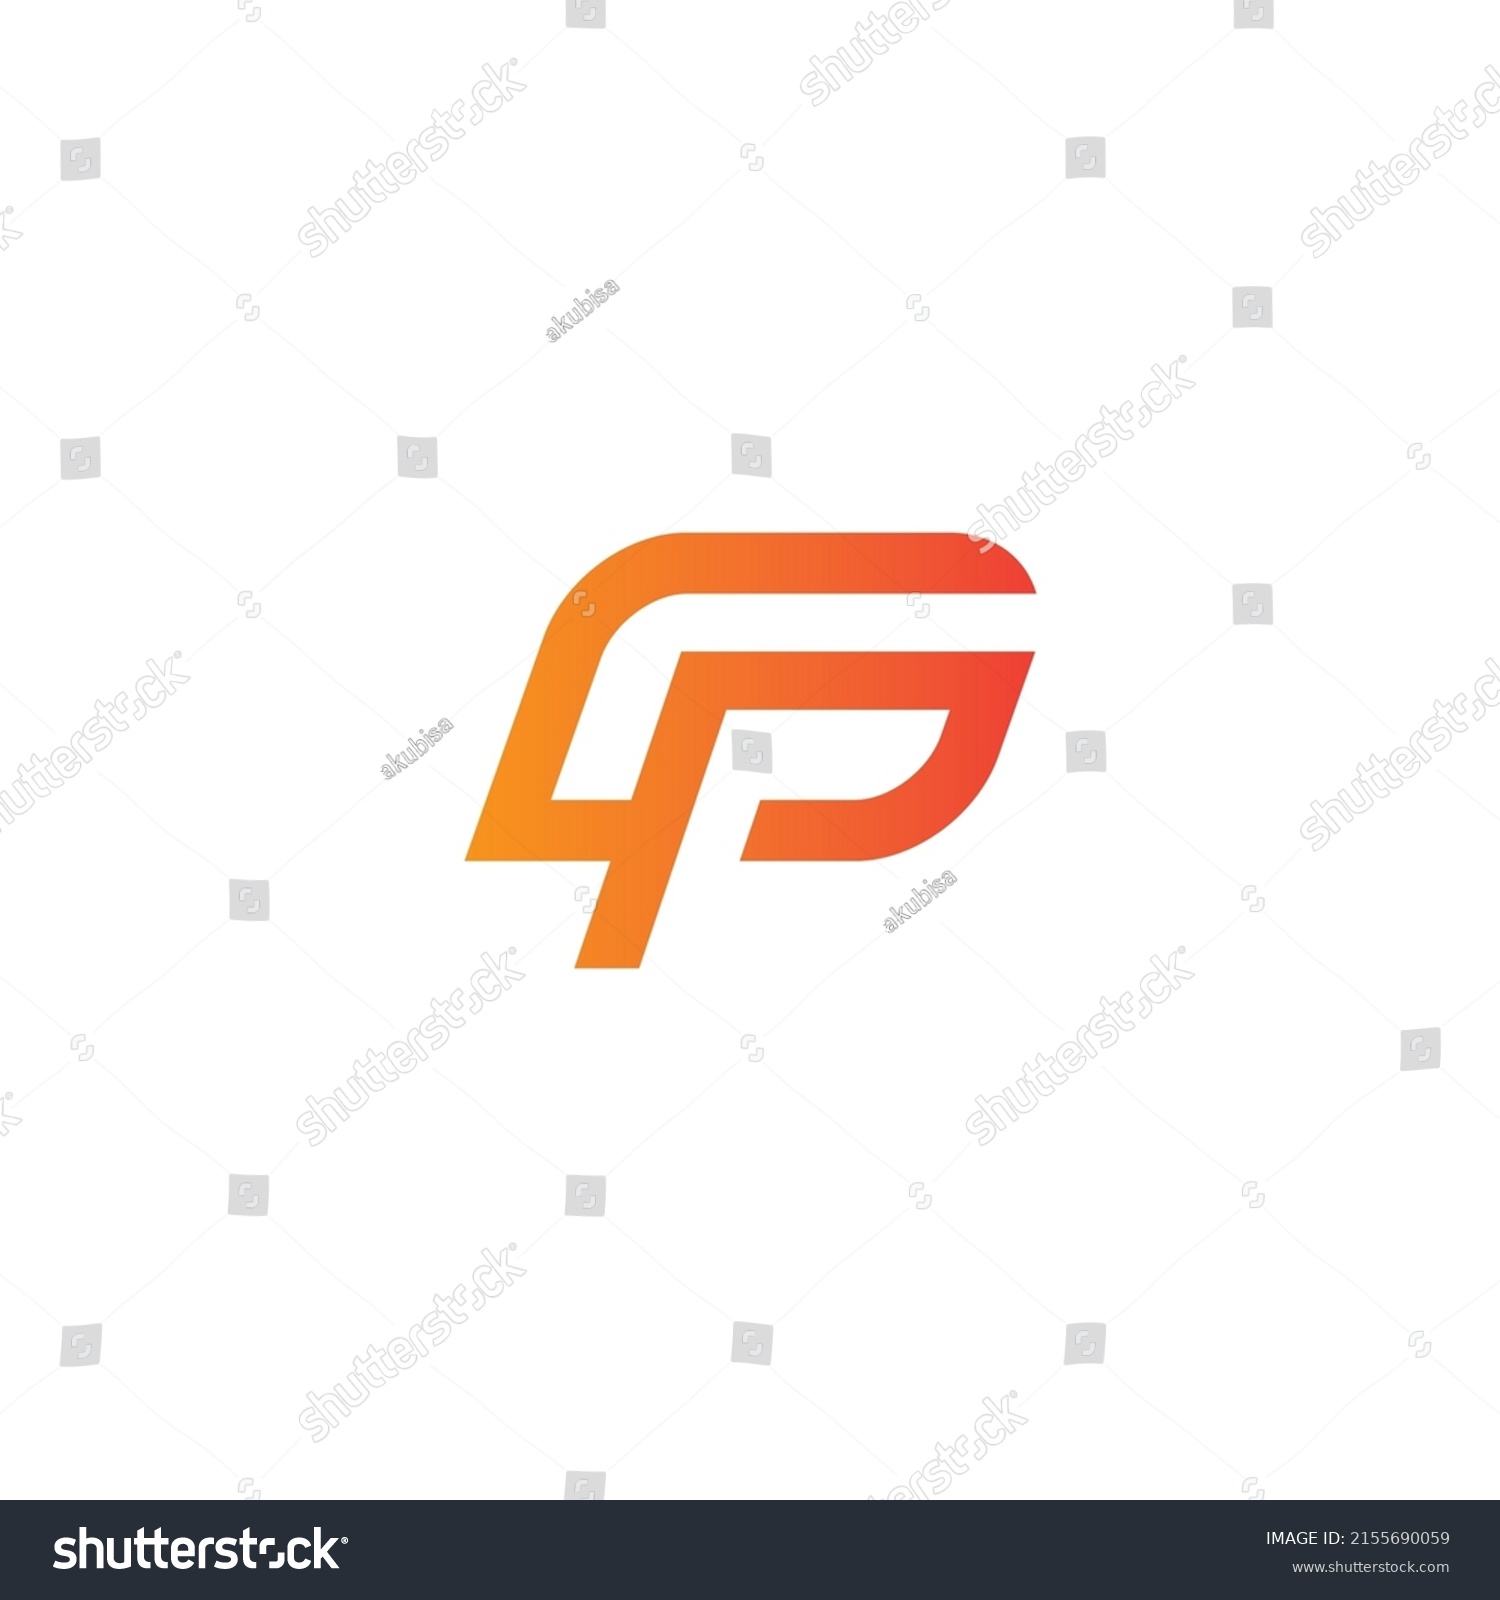 Gp Logo Symbol Suitable All Brand Stock Vector (Royalty Free ...